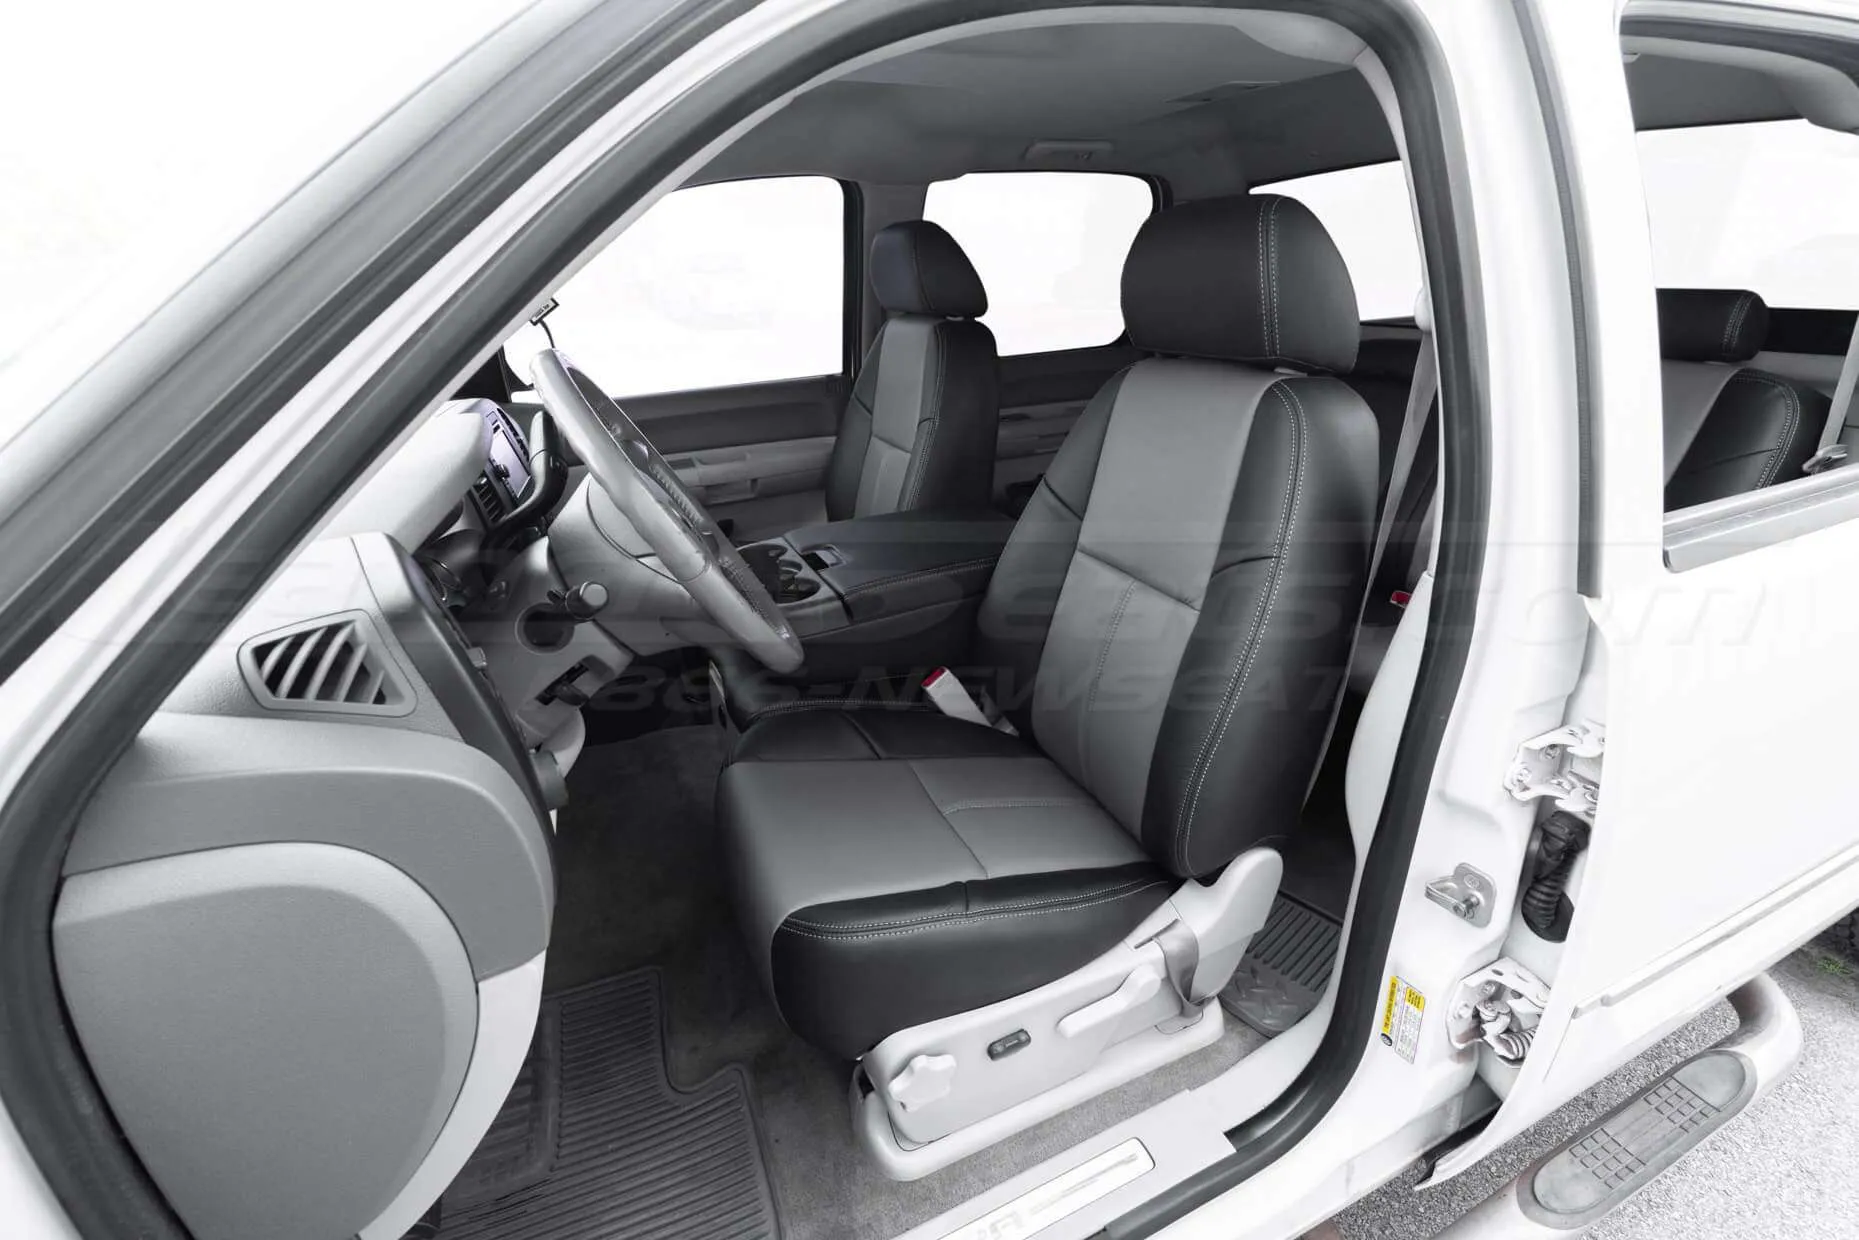 2007-2013 GMC SIerra with two-tone Black and Light Grey leather seats - Front driver